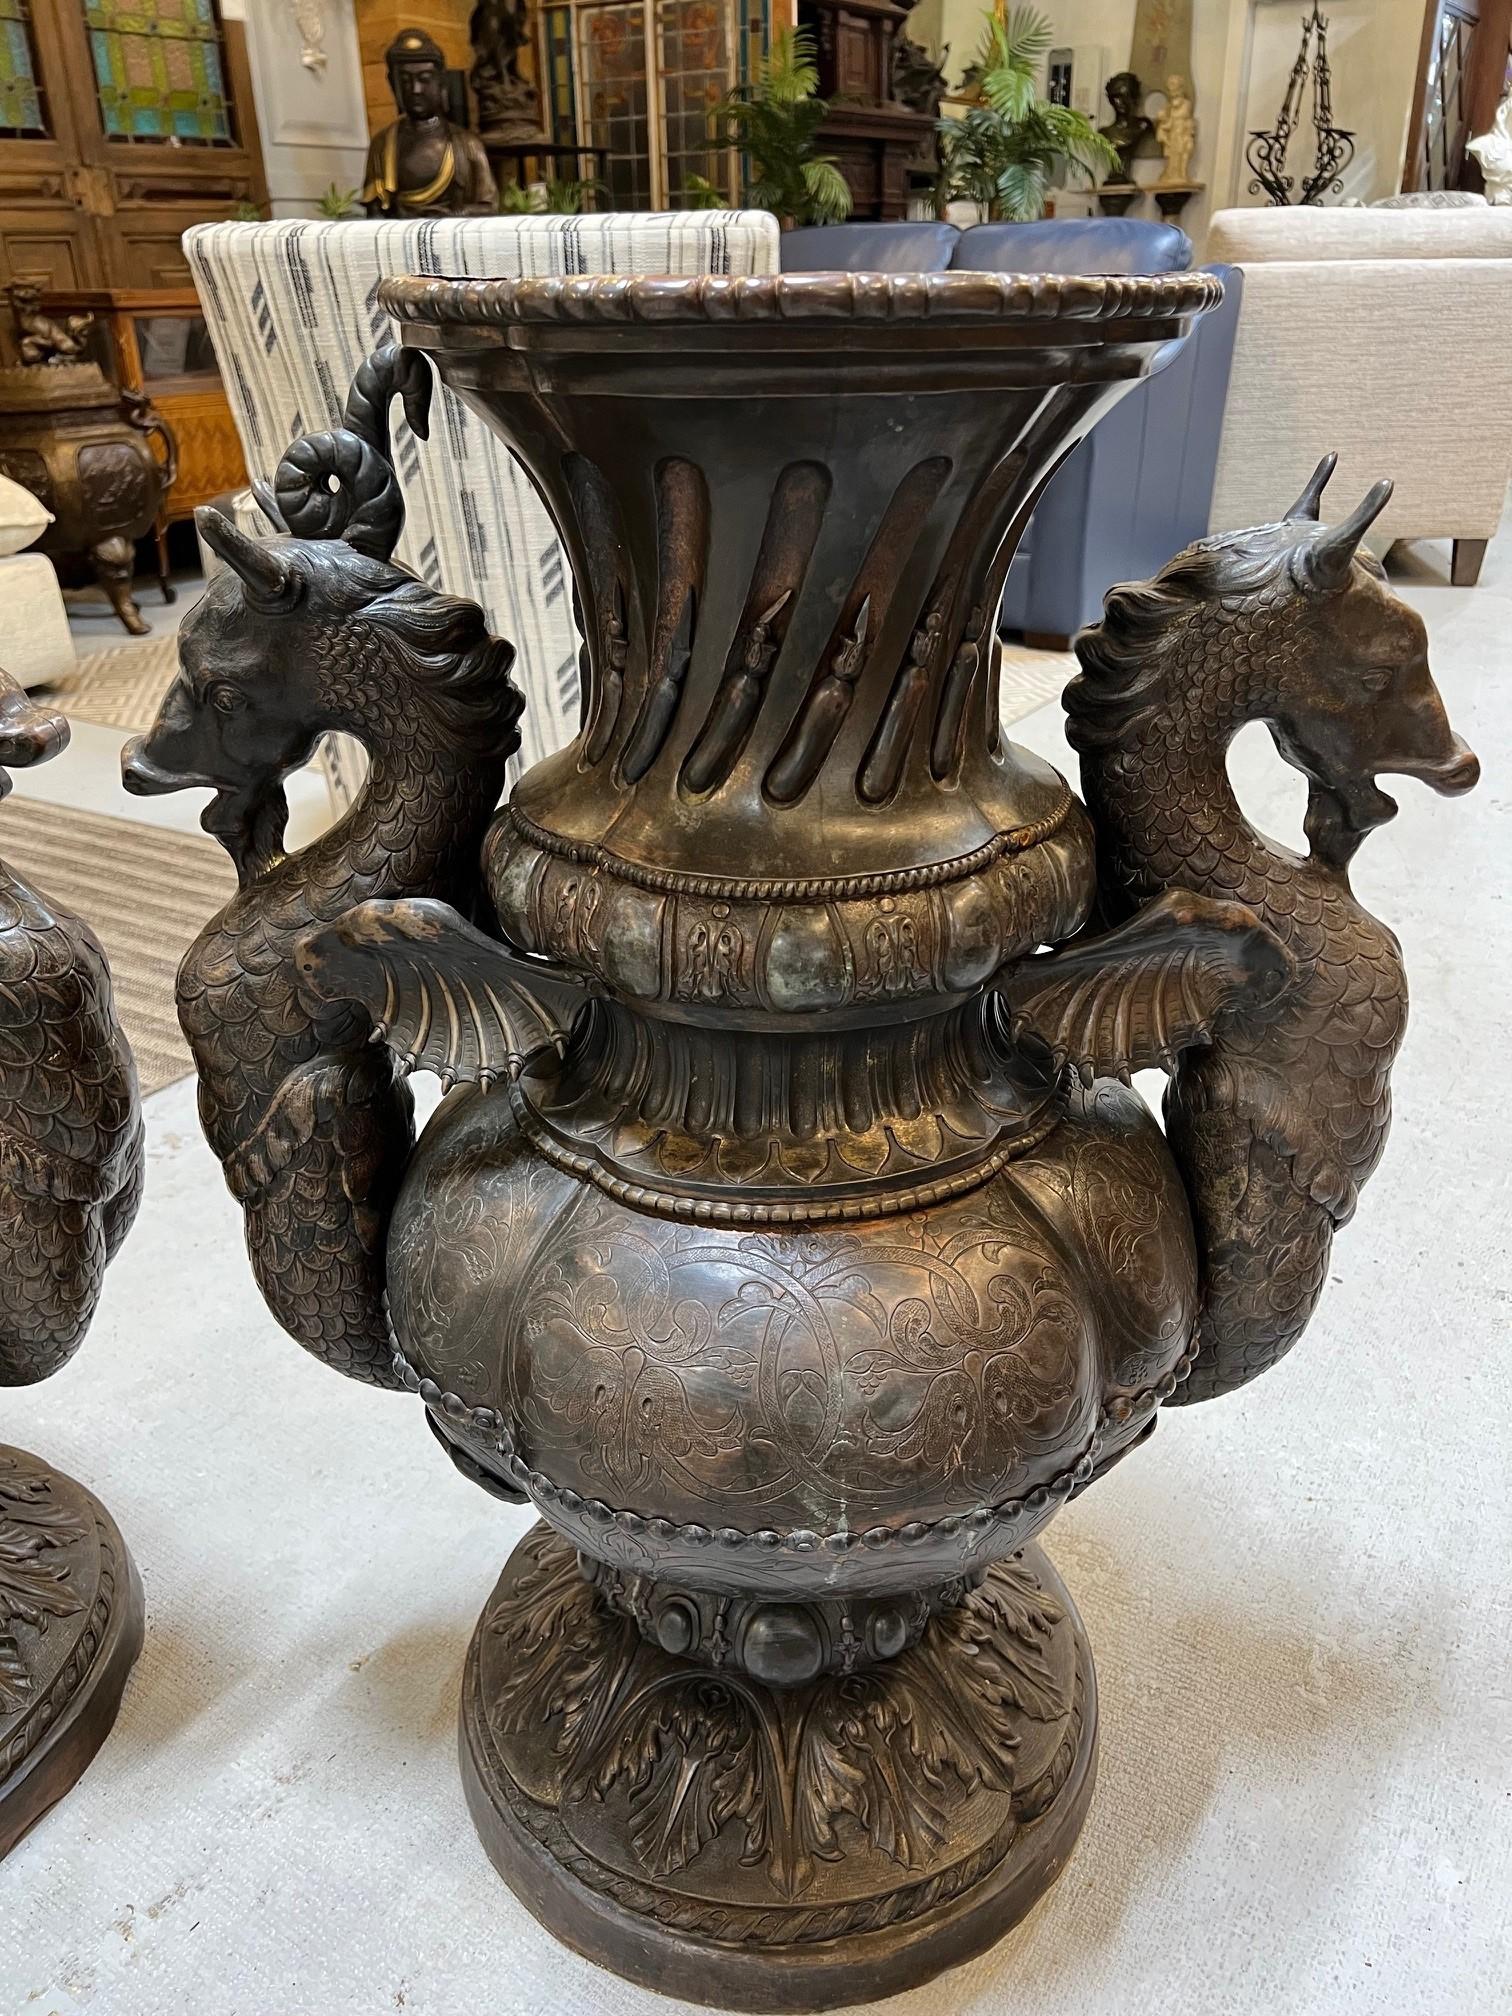 Pair of Antique Handcrafted Copper Urns with Mythological Seahorse Handles   In Good Condition For Sale In Stamford, CT